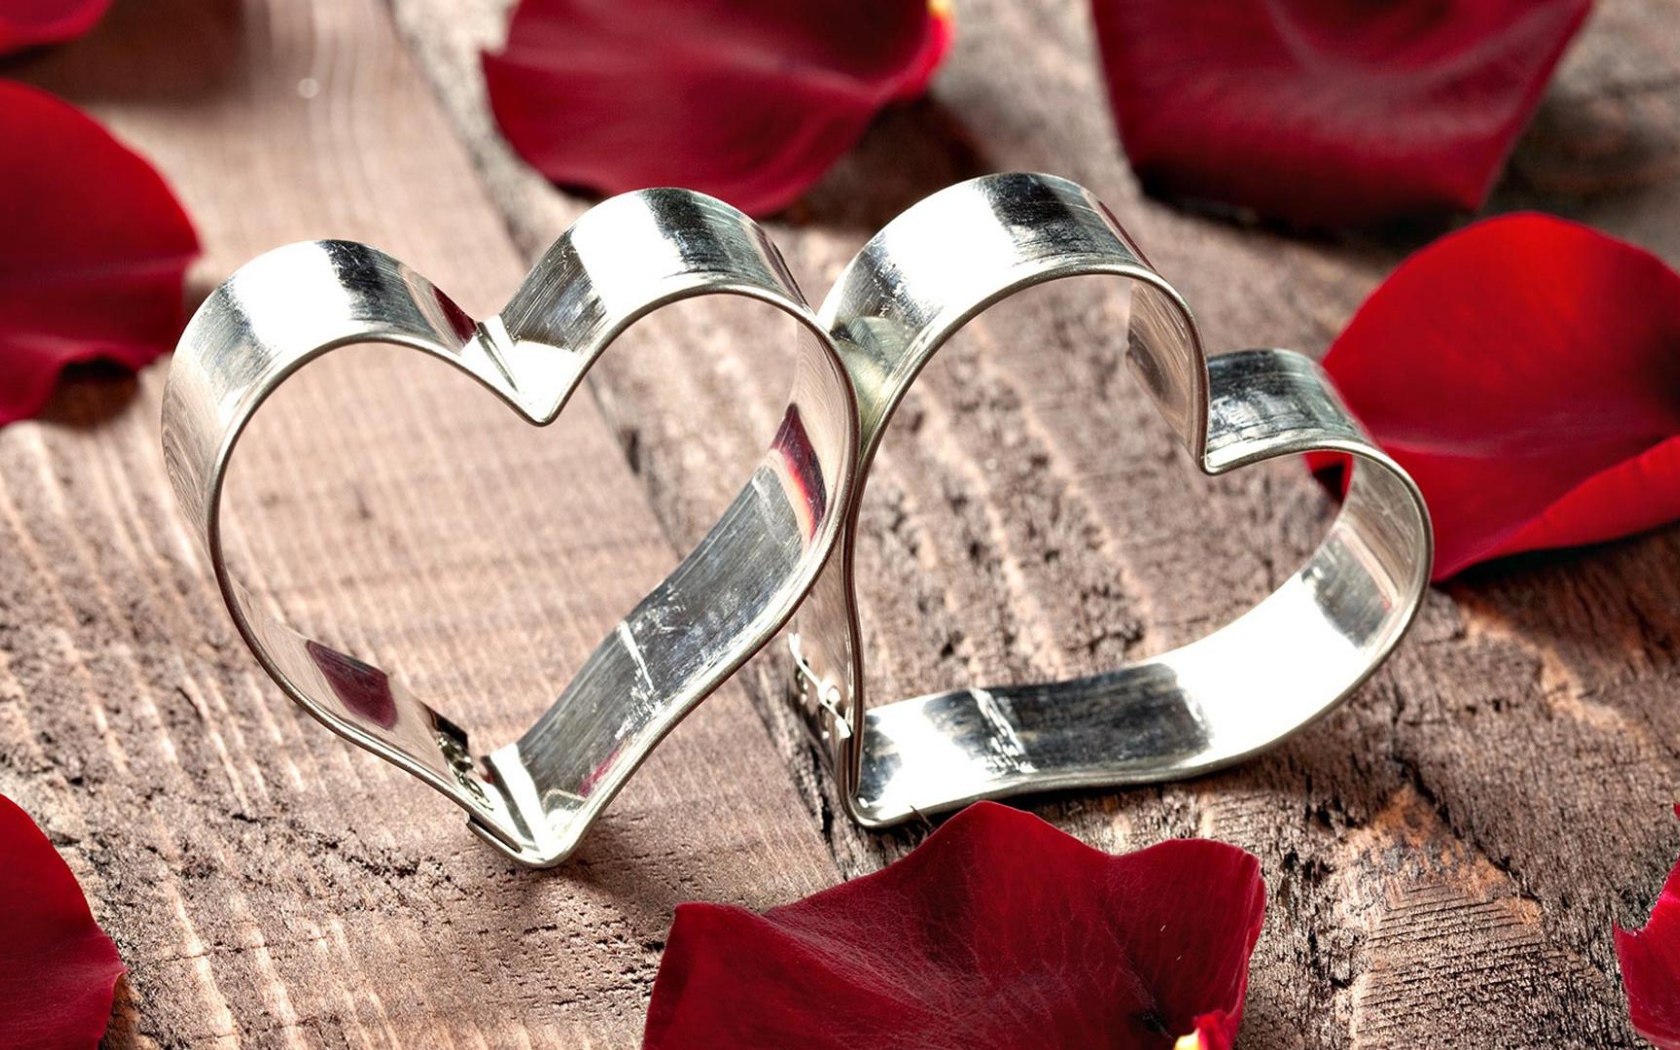 Two silver hearts in red rose petals